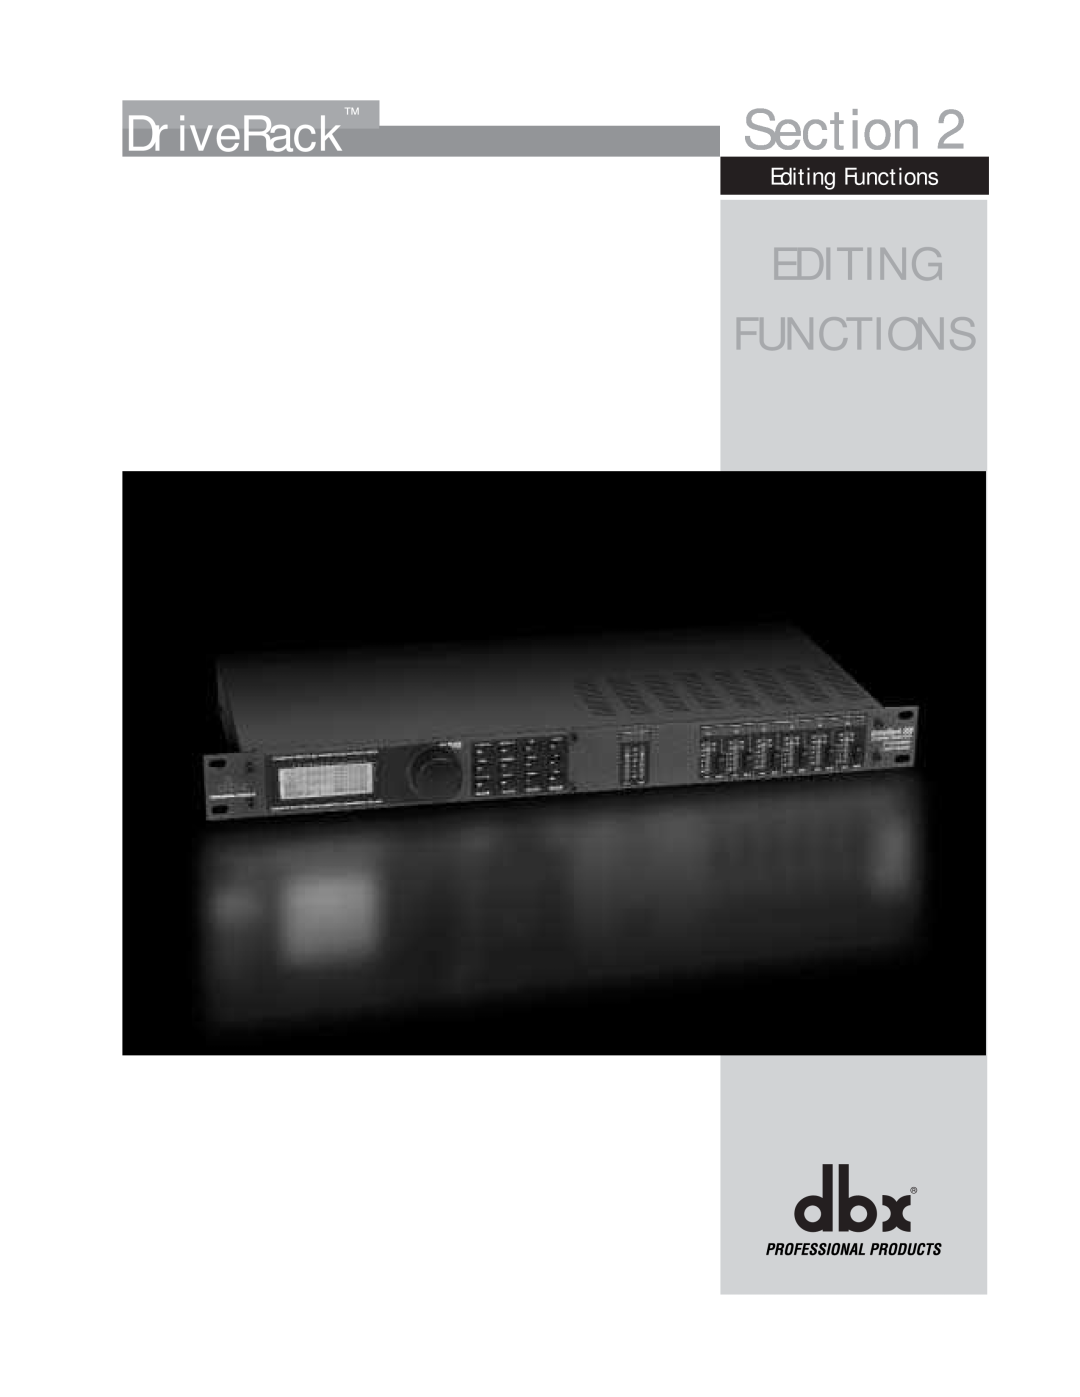 dbx Pro 260 user manual Section, DriveRack, Editing Functions 